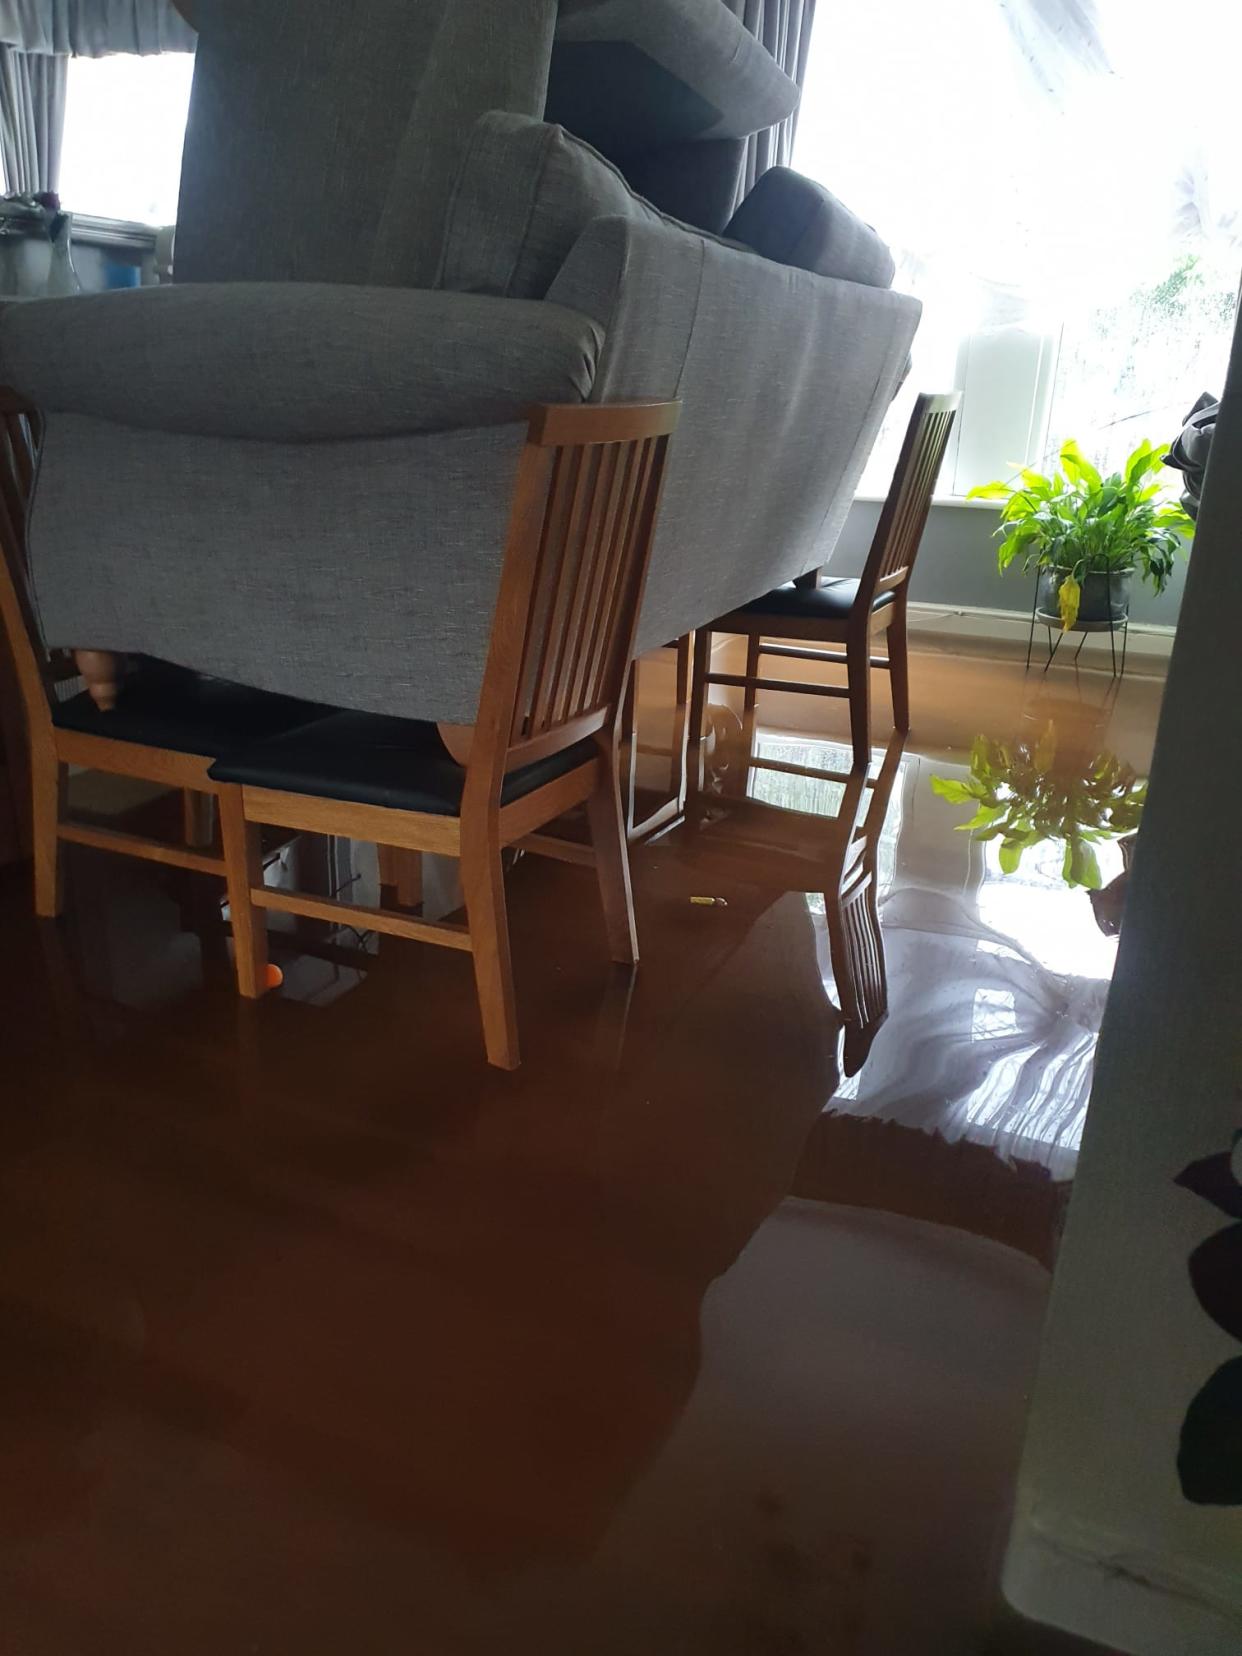 Flooding at a house in Walthamstow